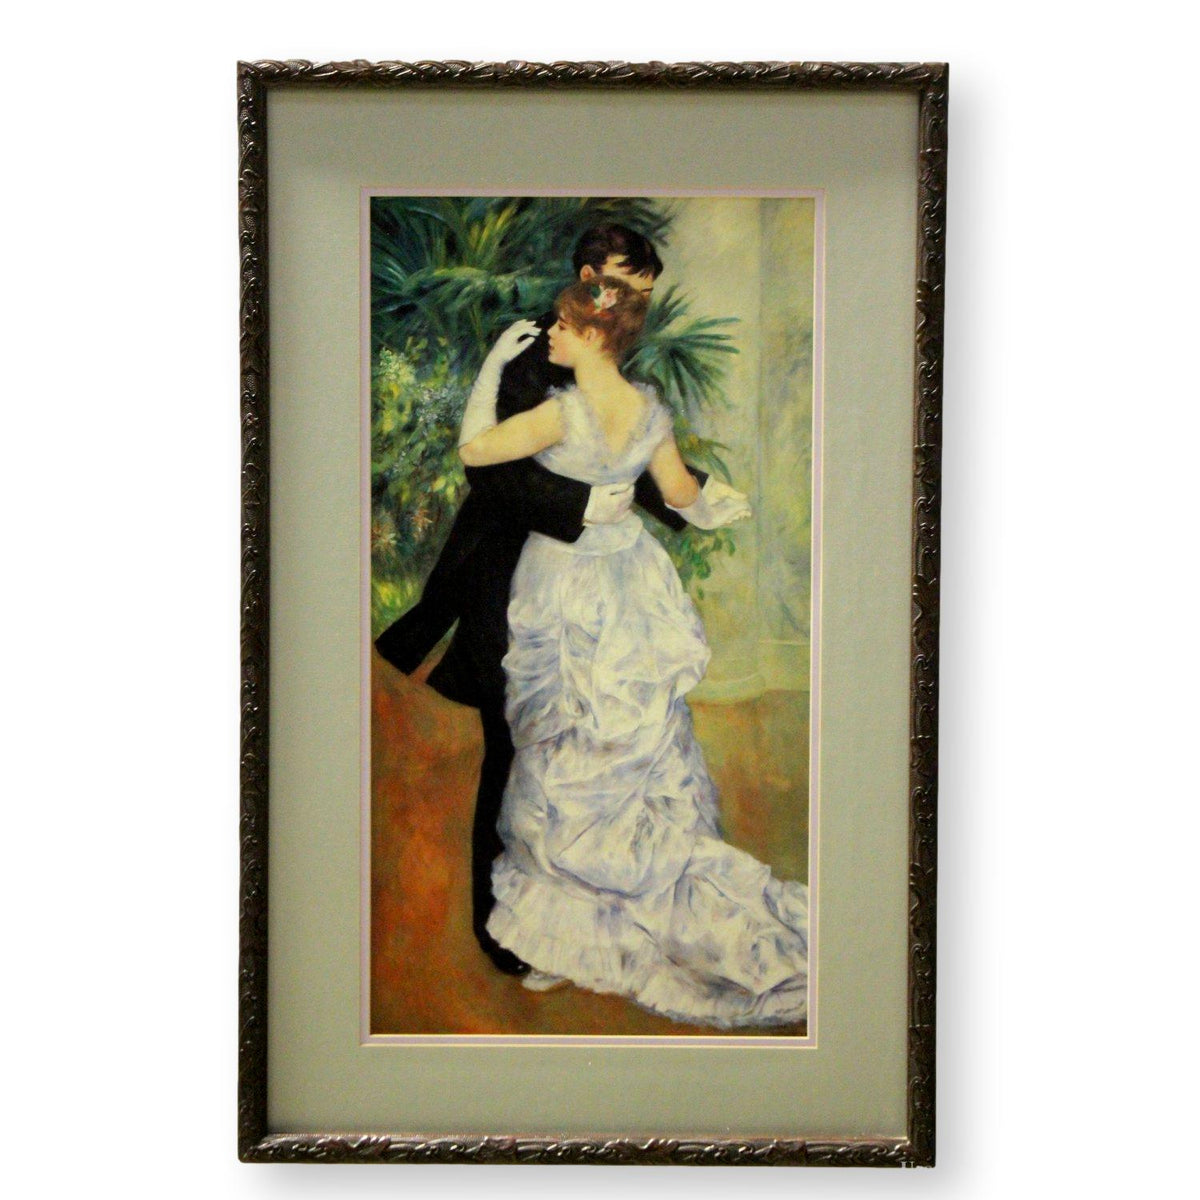 Framed Lithograph 'Dance in the City' By Pierre-Auguste Renoir